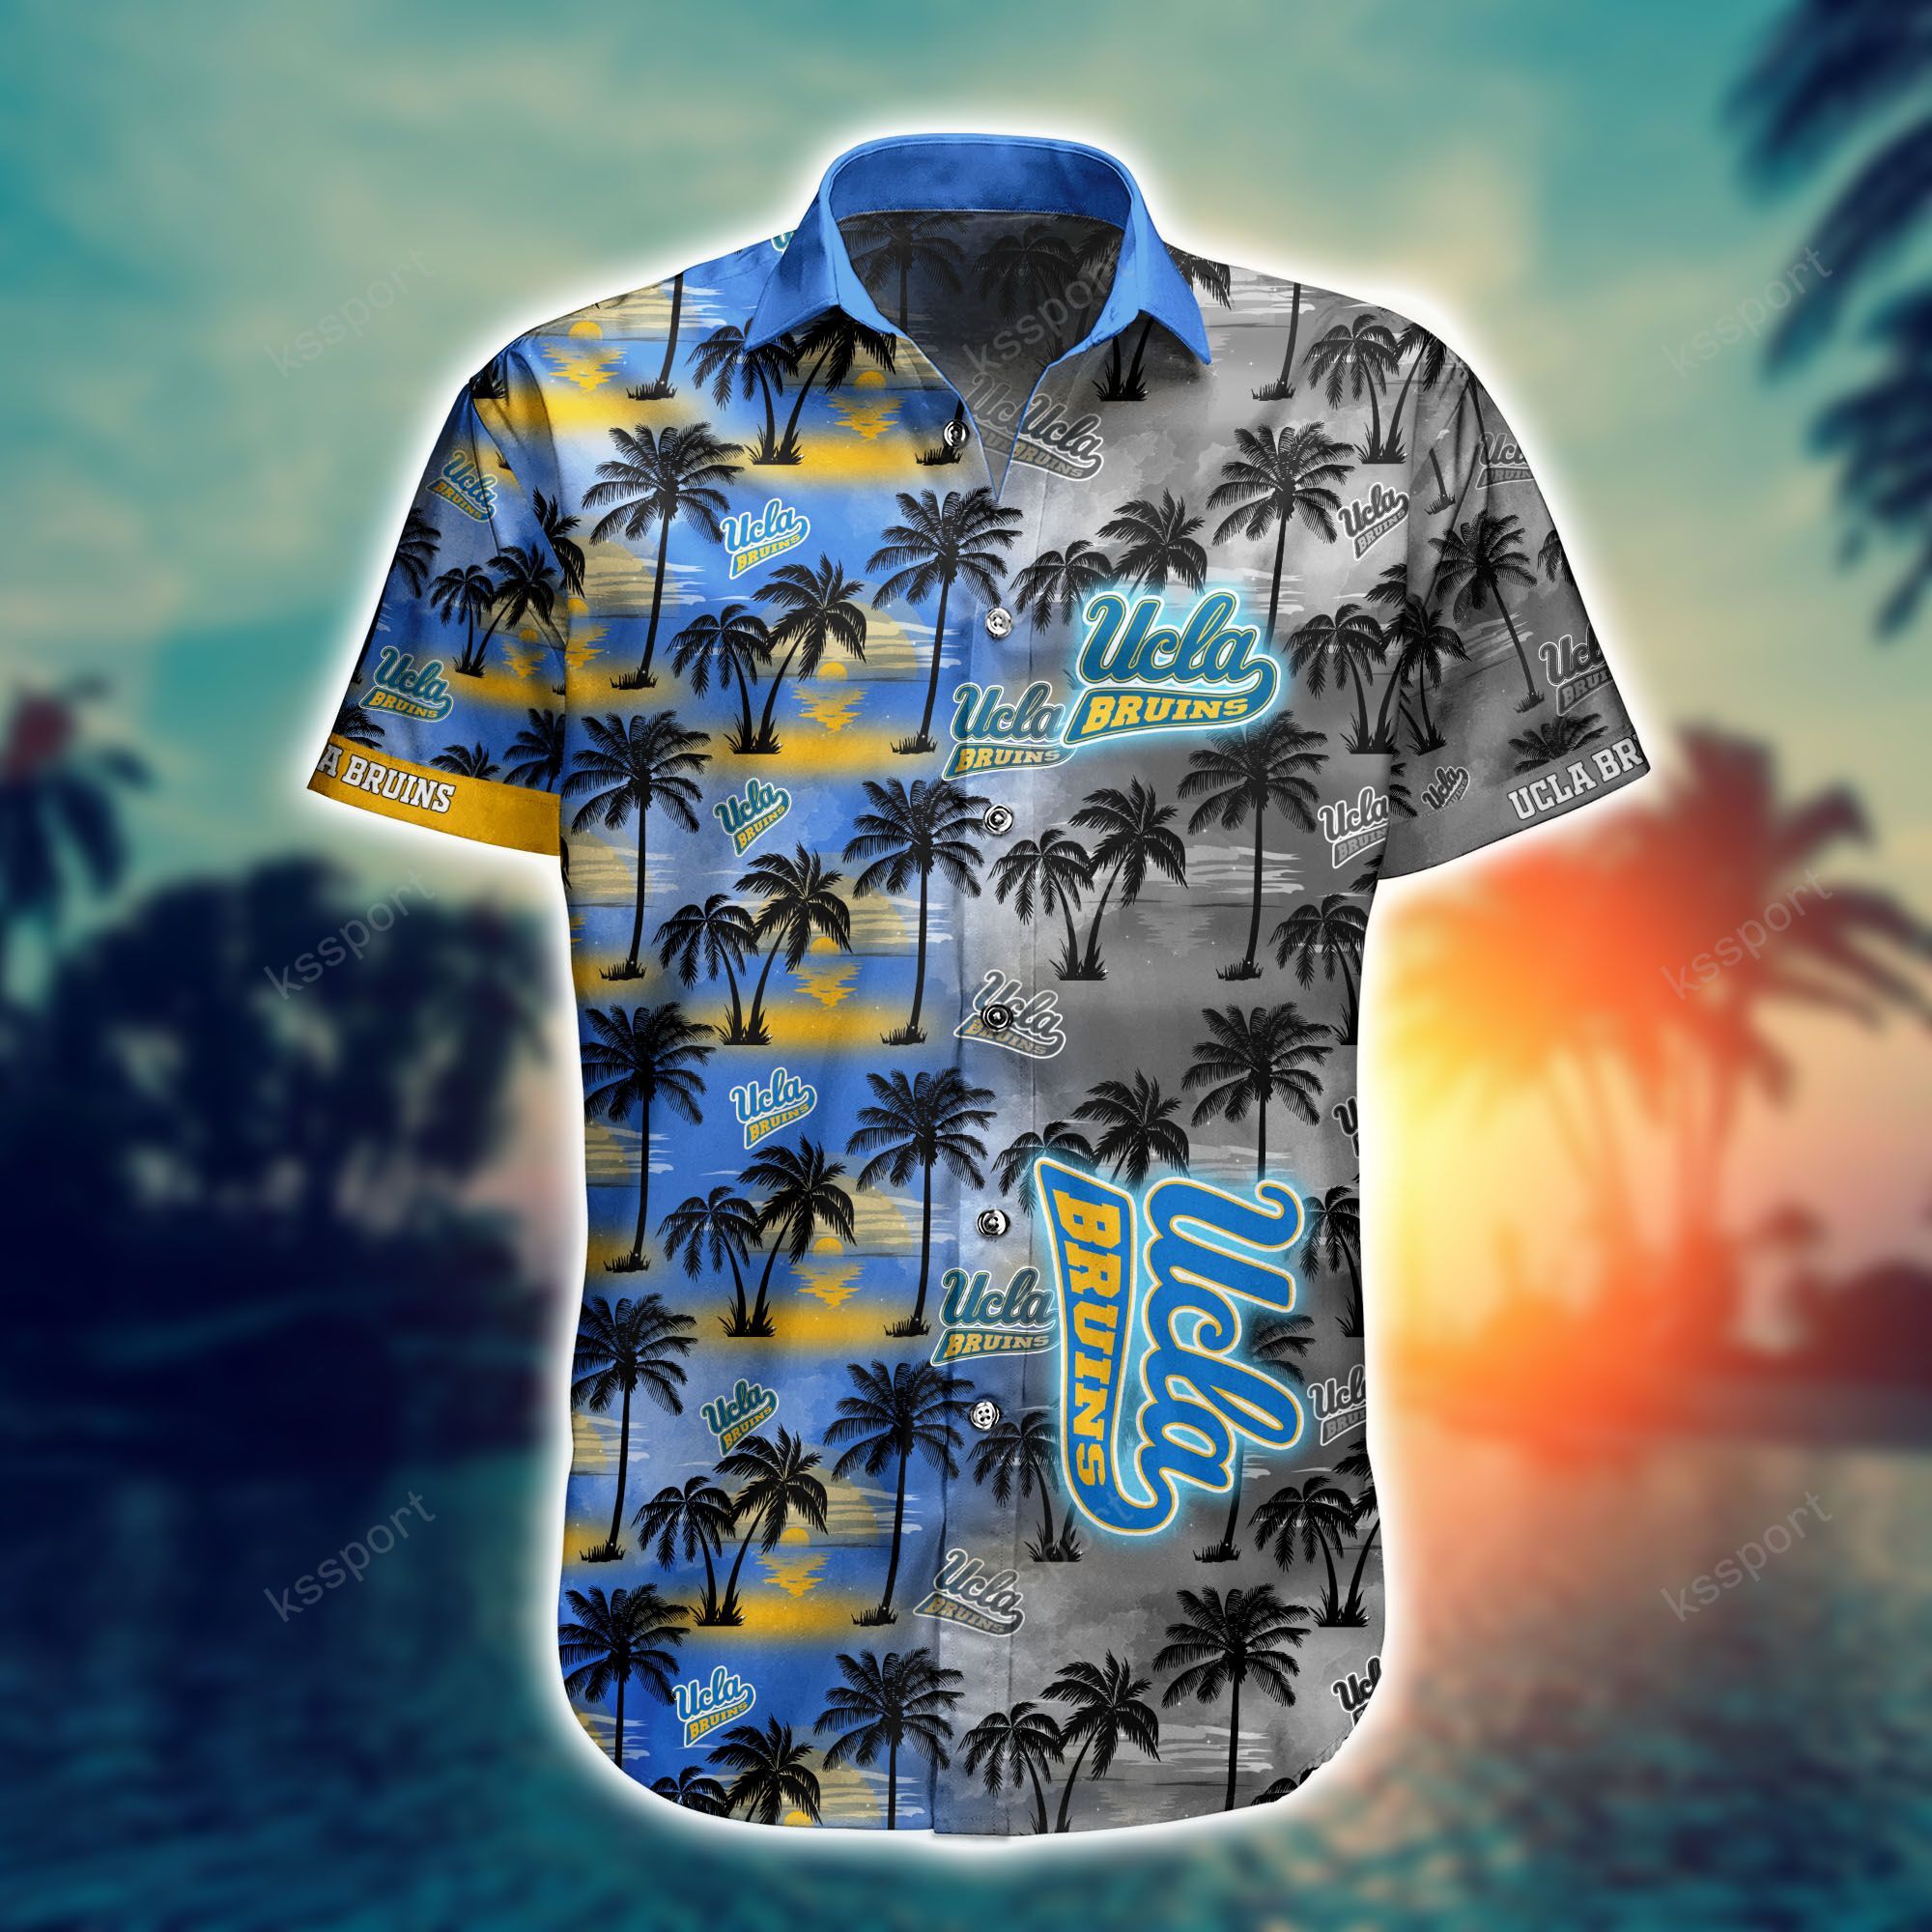 Top cool Hawaiian shirt 2022 - Make sure you get yours today before they run out! 180